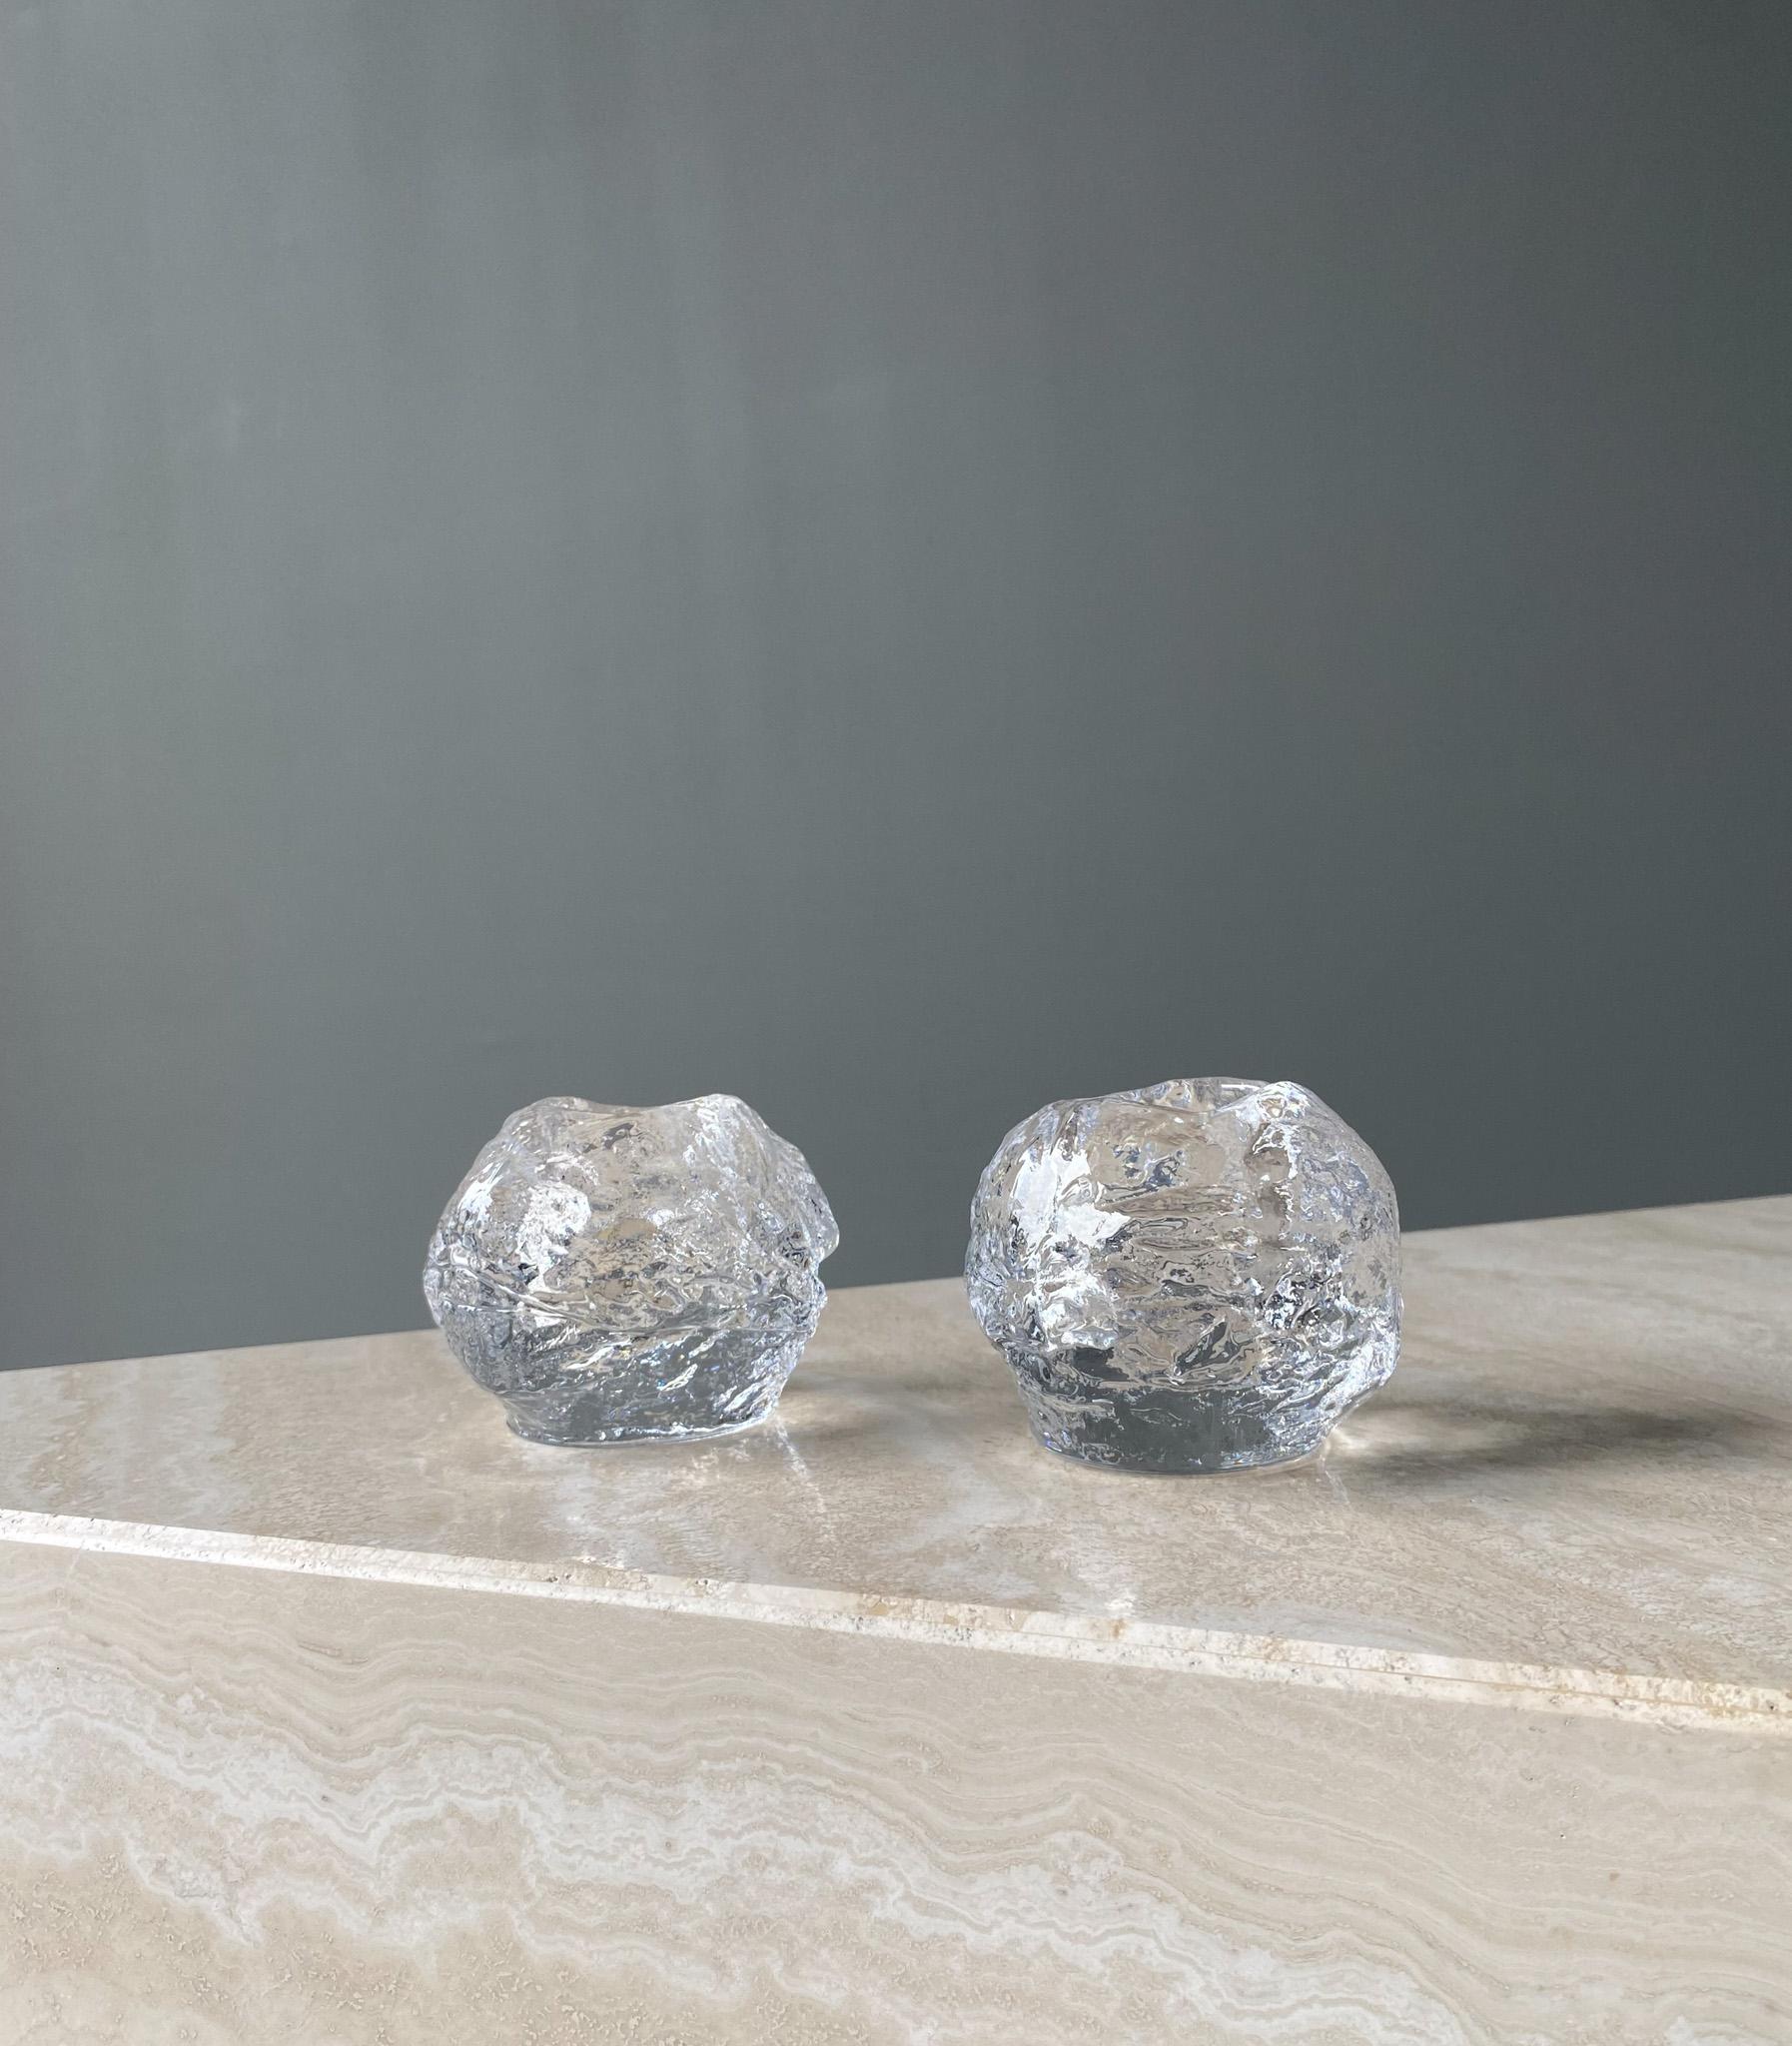 Ann Wolff Snowball Glass Crystal Candle Holder for Kosta Boda, Sweden, circa 1980s.